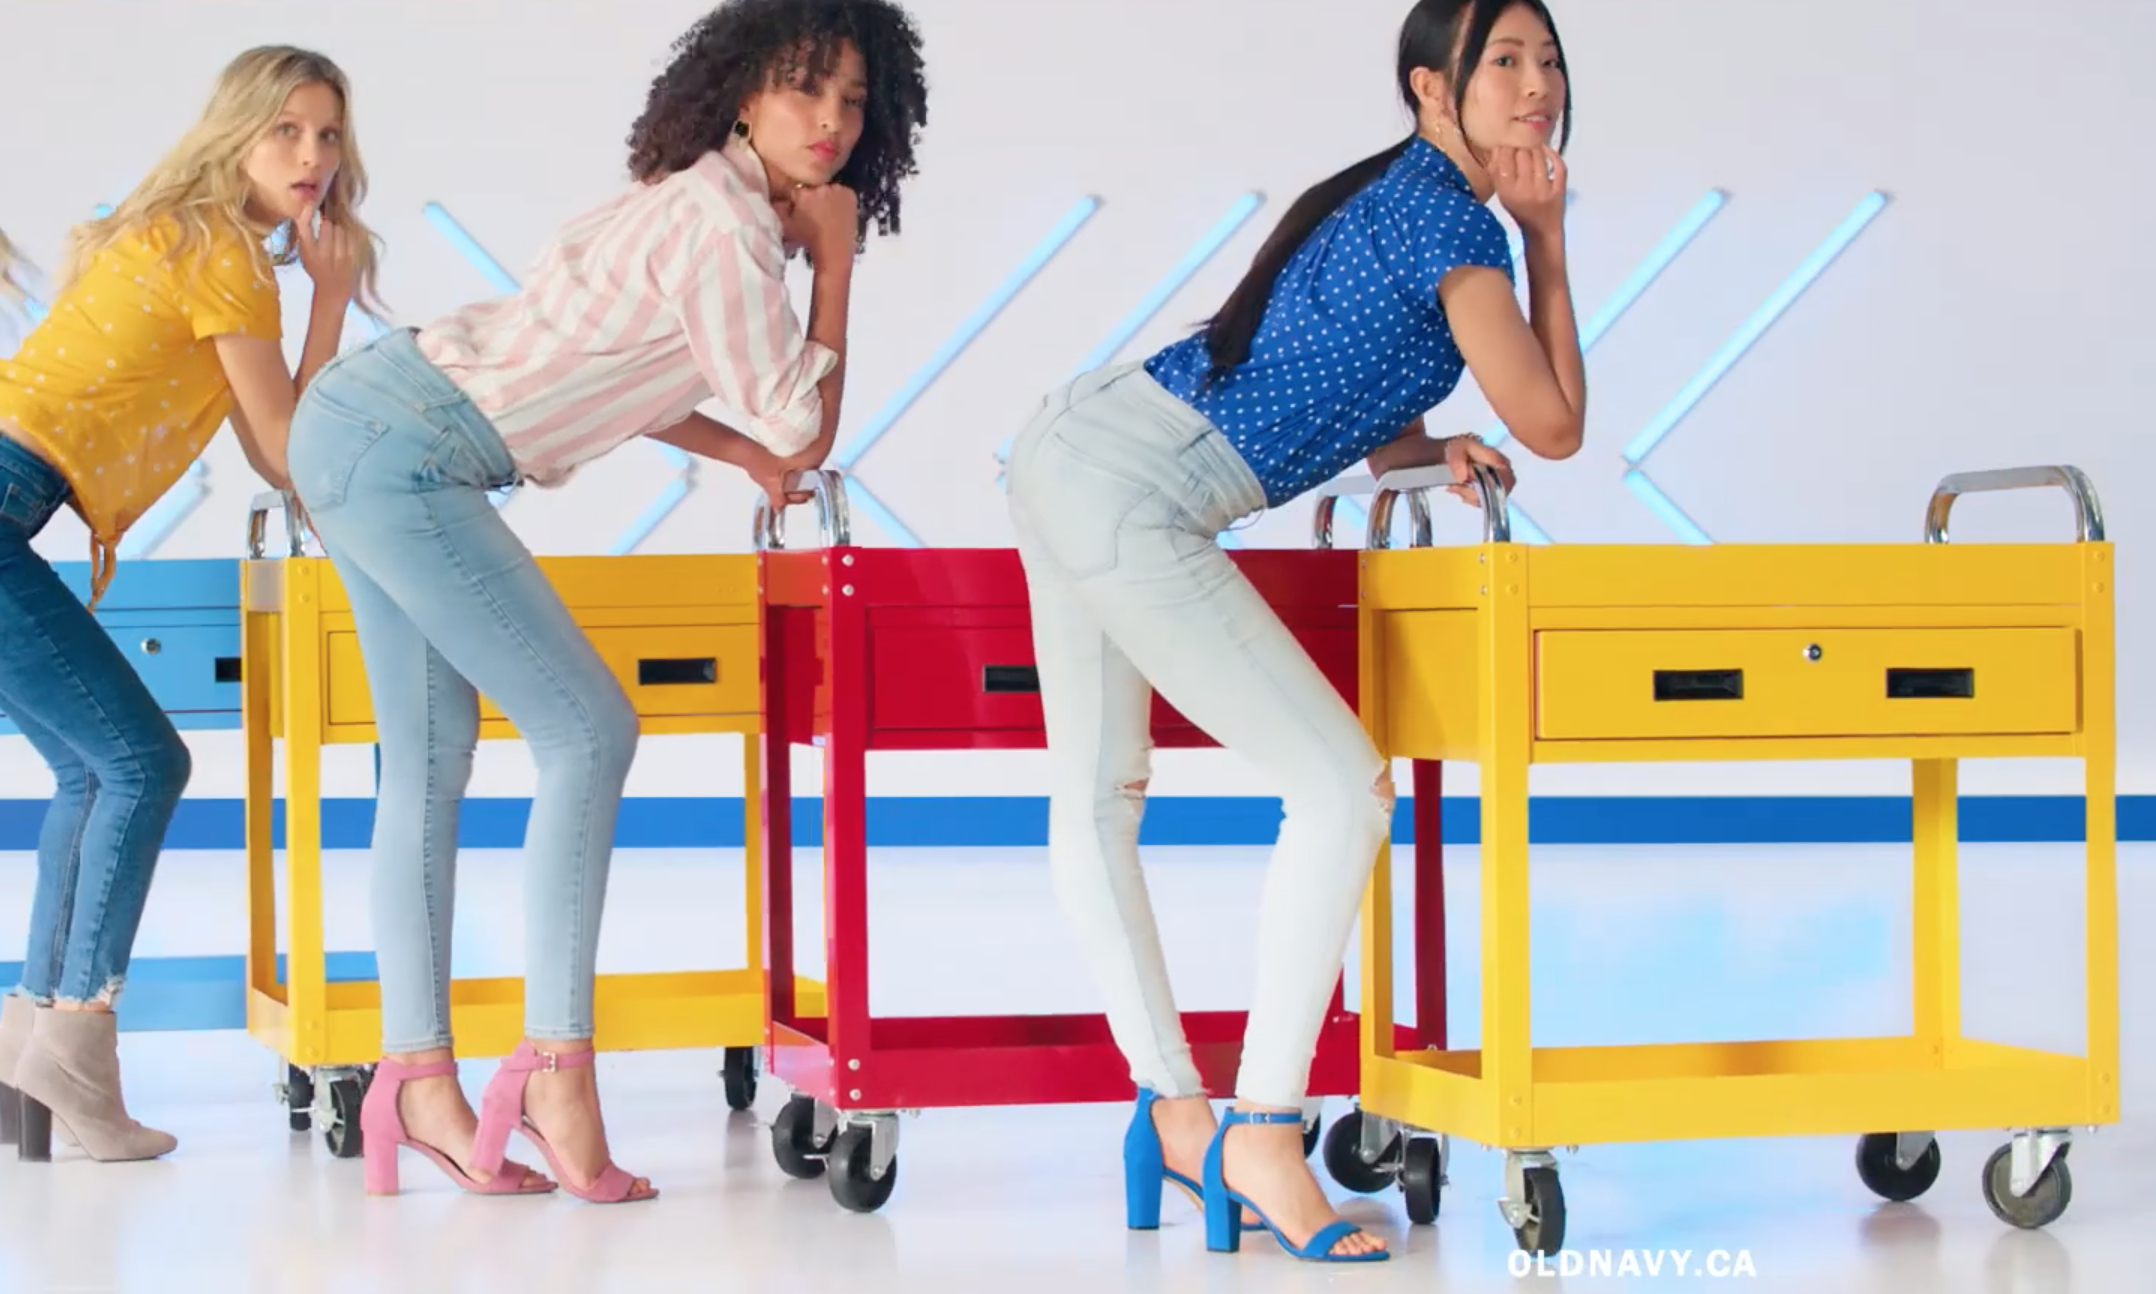 old navy jeans commercial 2019